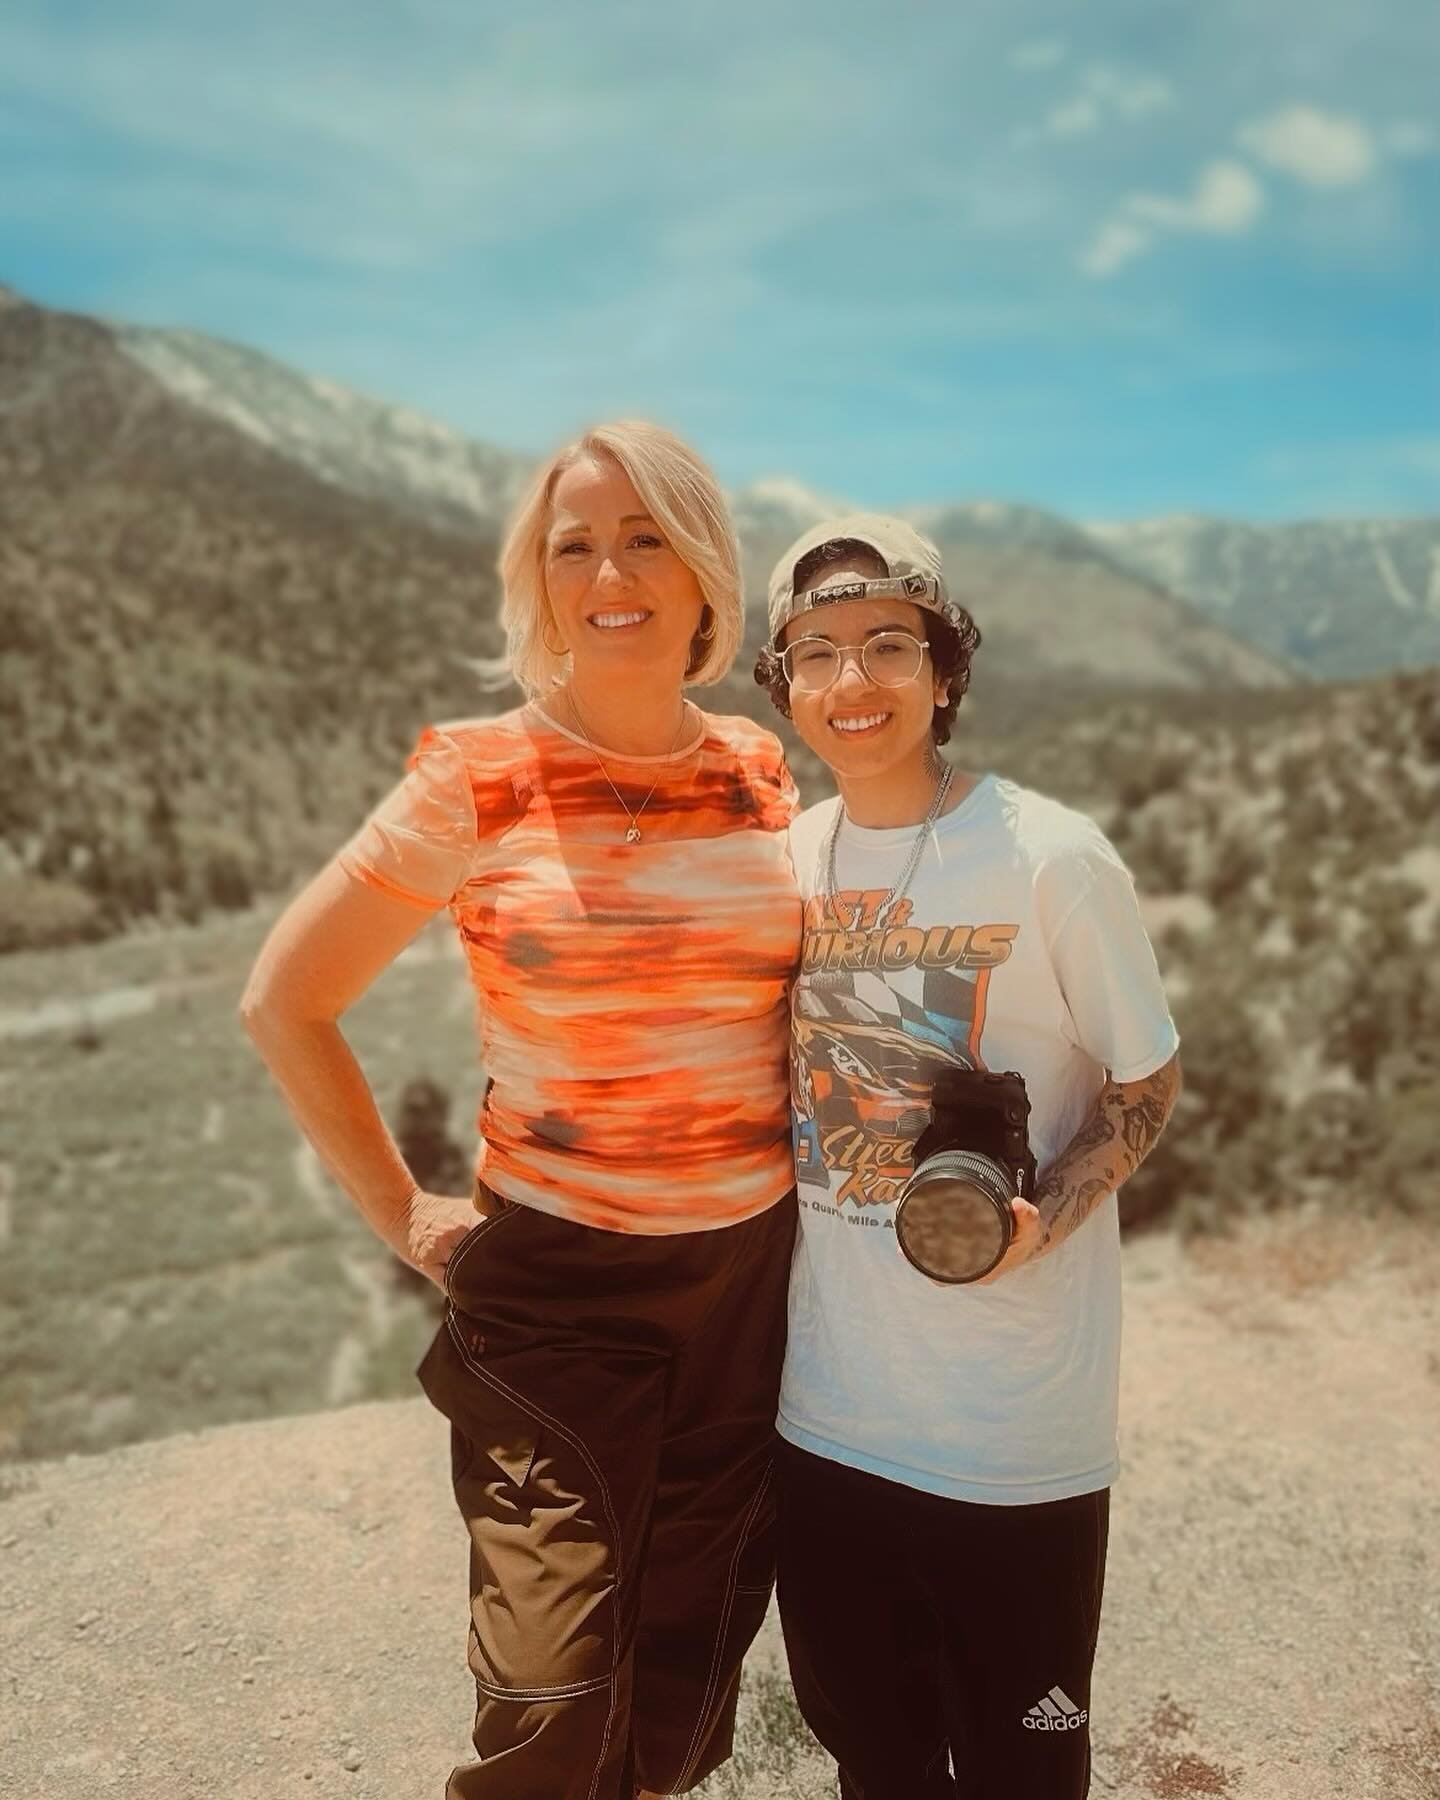 Combining business &amp; friendship in Las Vegas!🌵🏜️
@nickykfilm is a filmmaker I&rsquo;ve known since they were a baby!
We worked on some cool videos to share in the coming days! 
I loved sharing more about my feature film, Secrets on Bonnanel.📍
